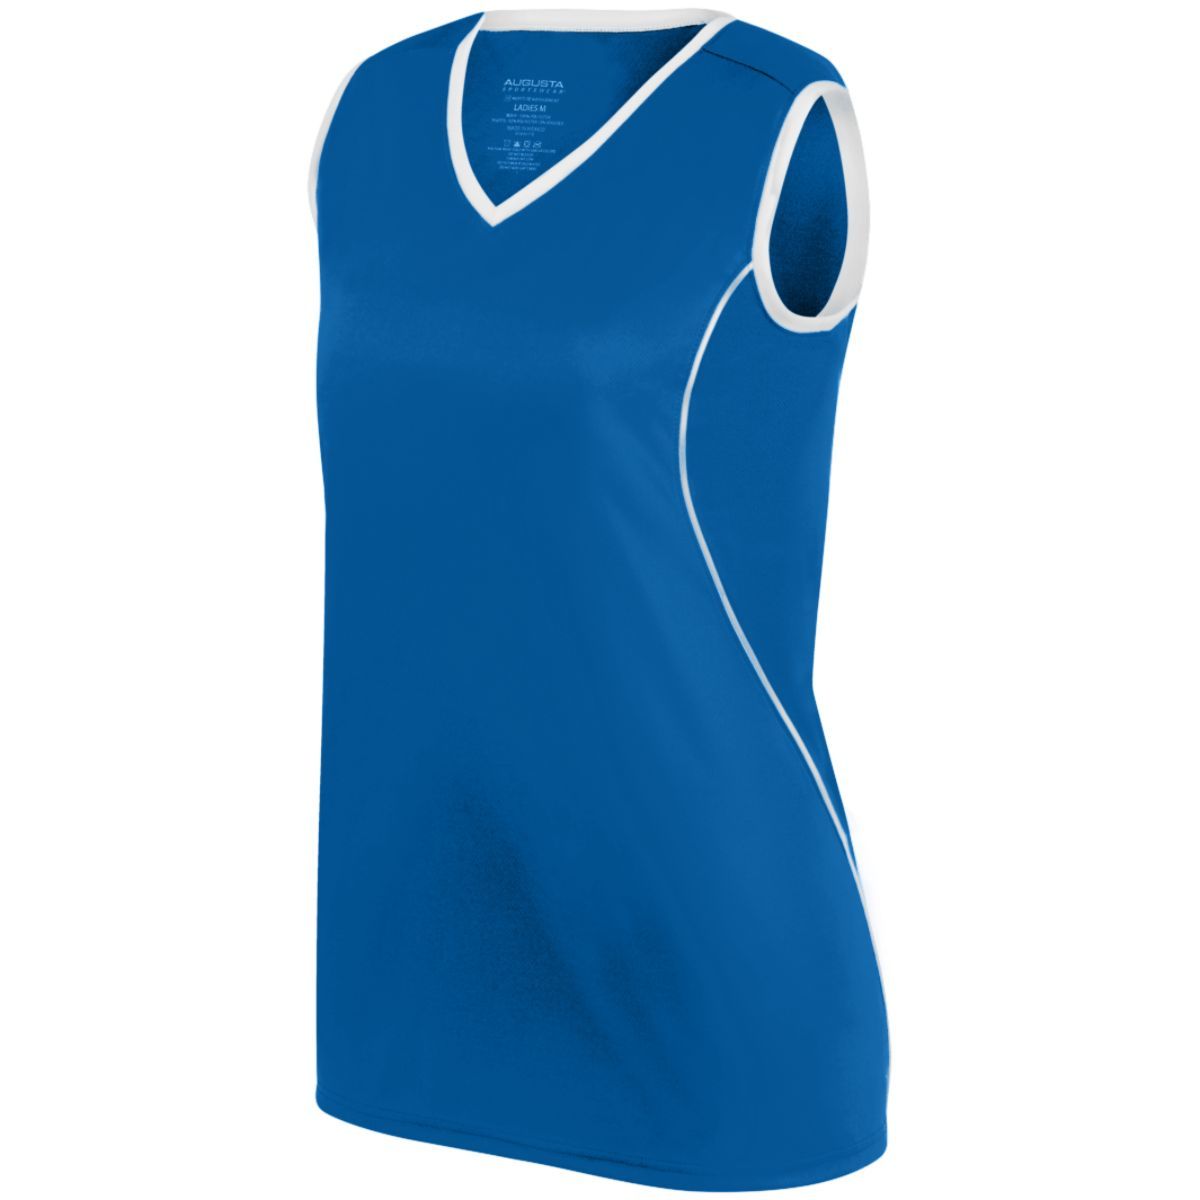 Augusta Sportswear Girls Firebolt Jersey in Royal/White  -Part of the Girls, Augusta-Products, Softball, Girls-Jersey, Shirts product lines at KanaleyCreations.com